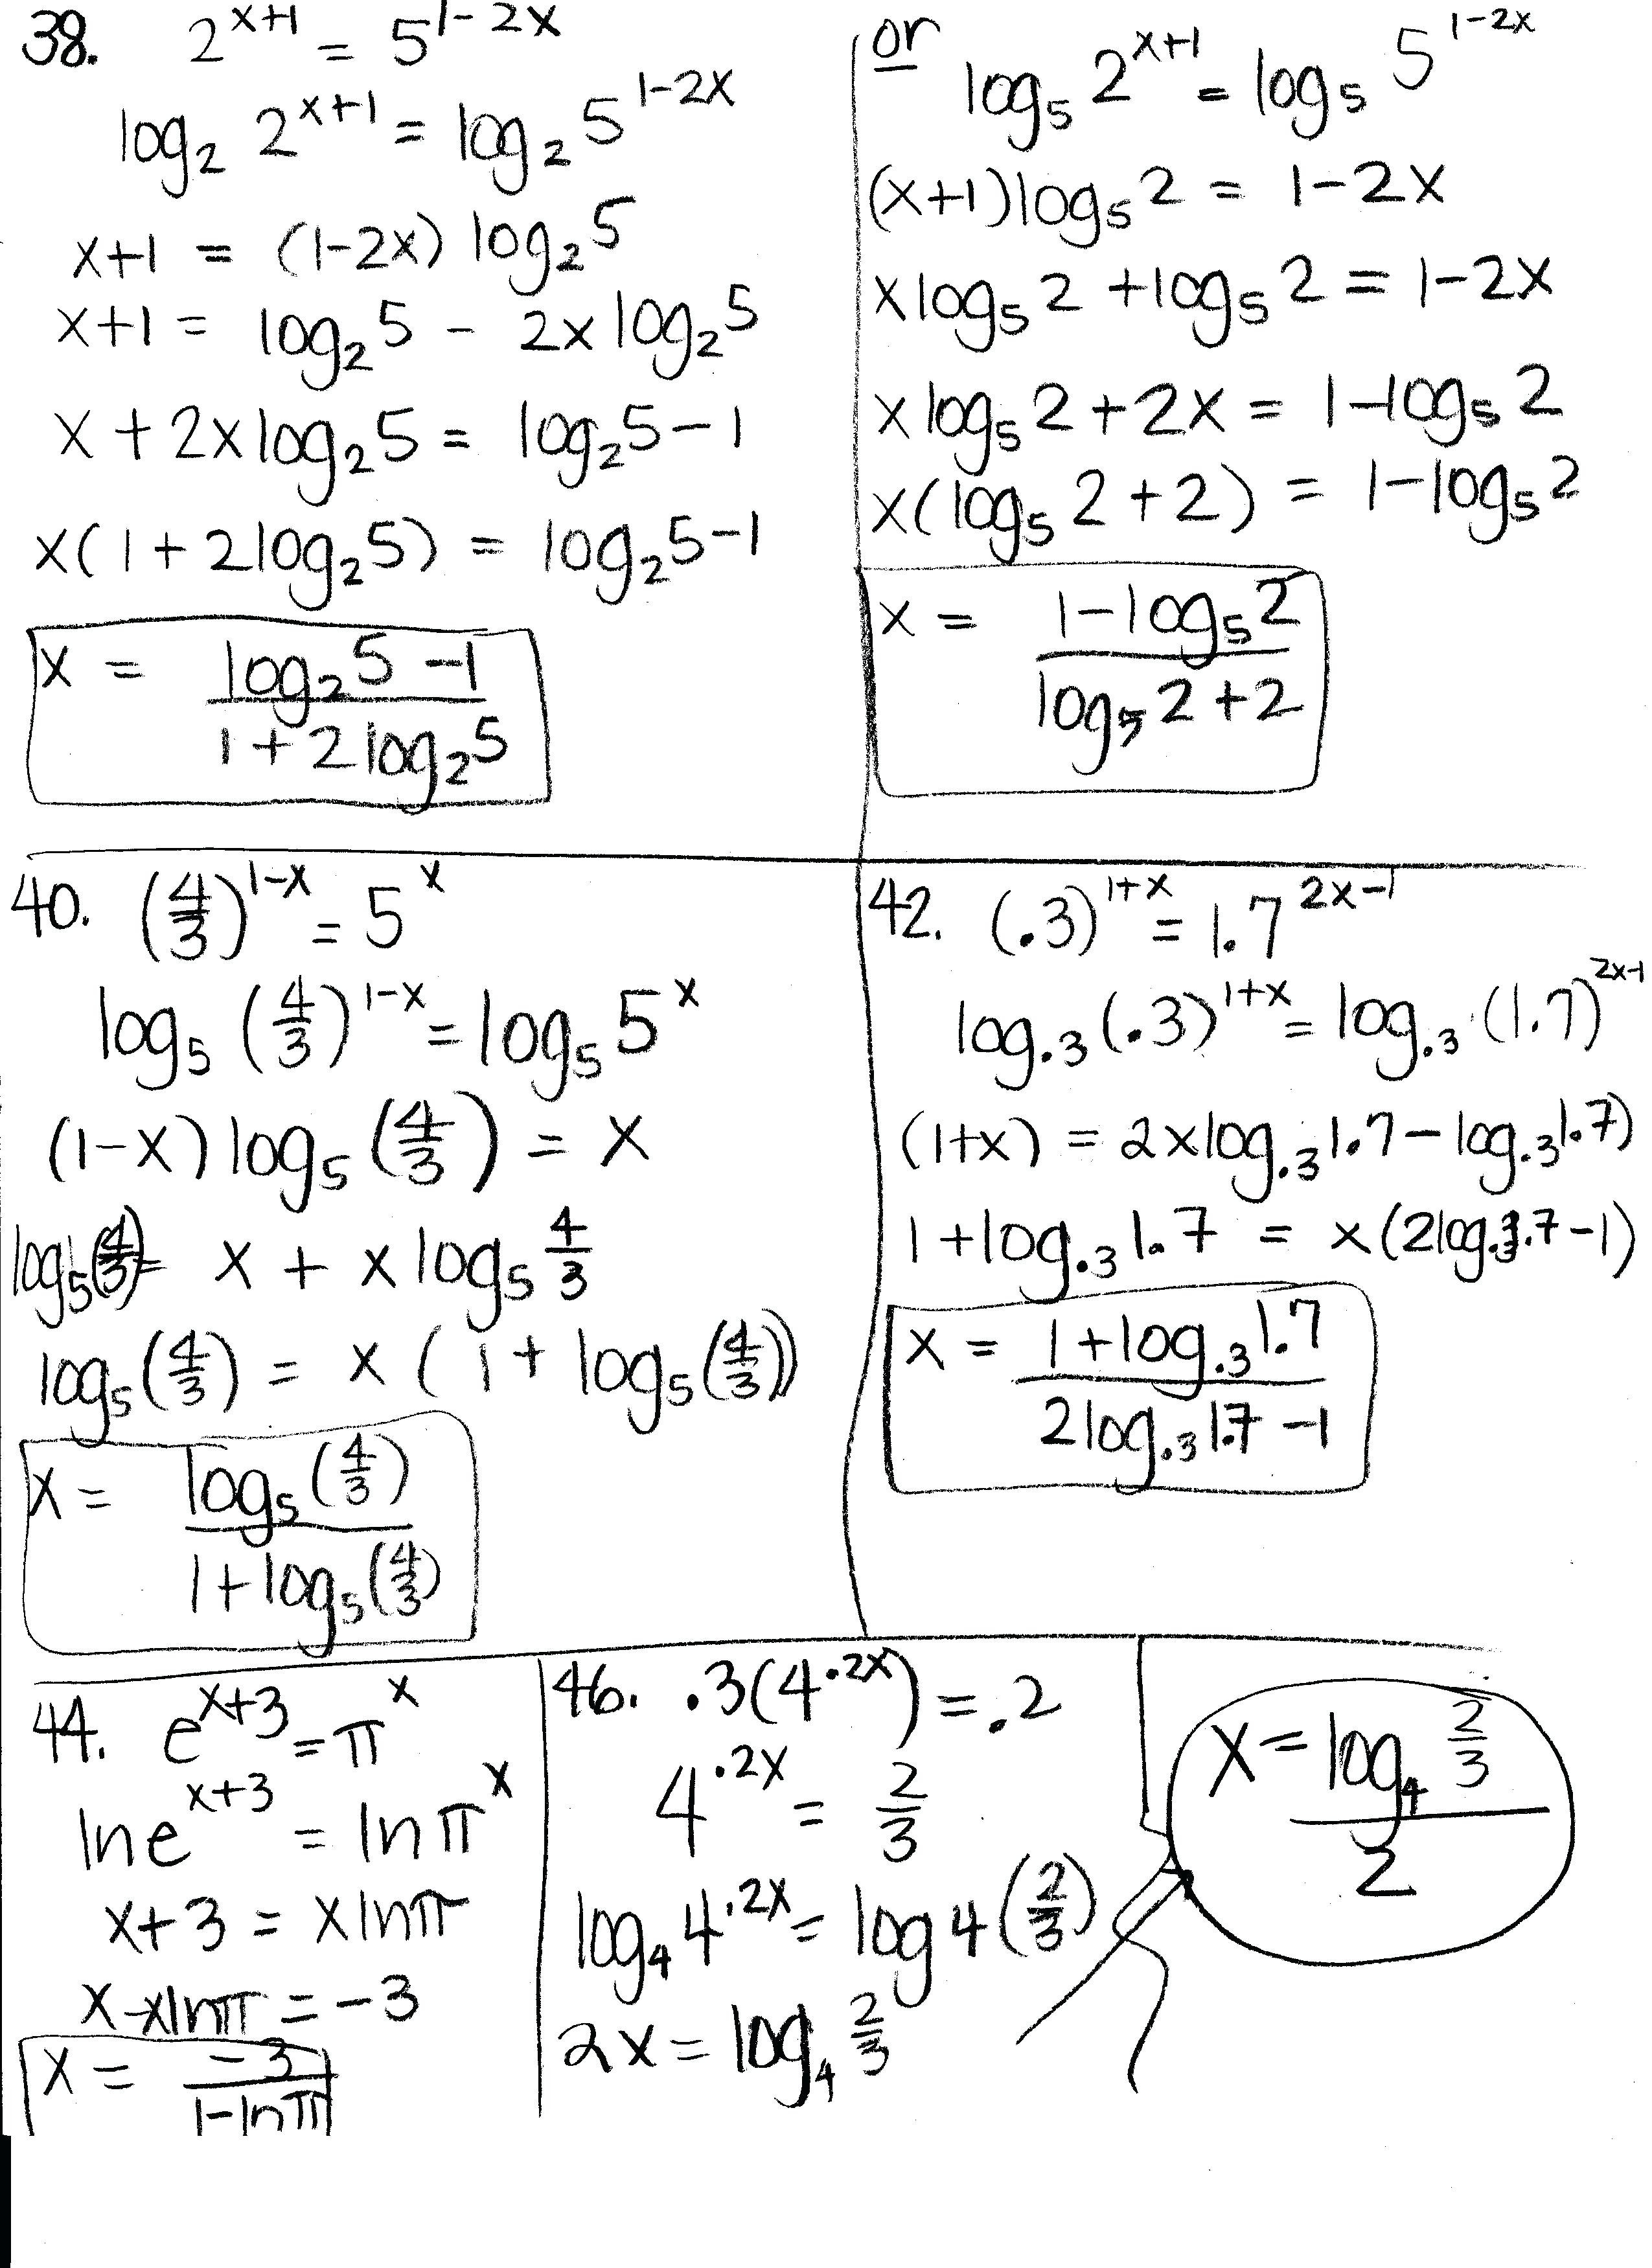 How To Write Logarithms In Exponential Form Math Exponential Or Logarithmic Equations Worksheet